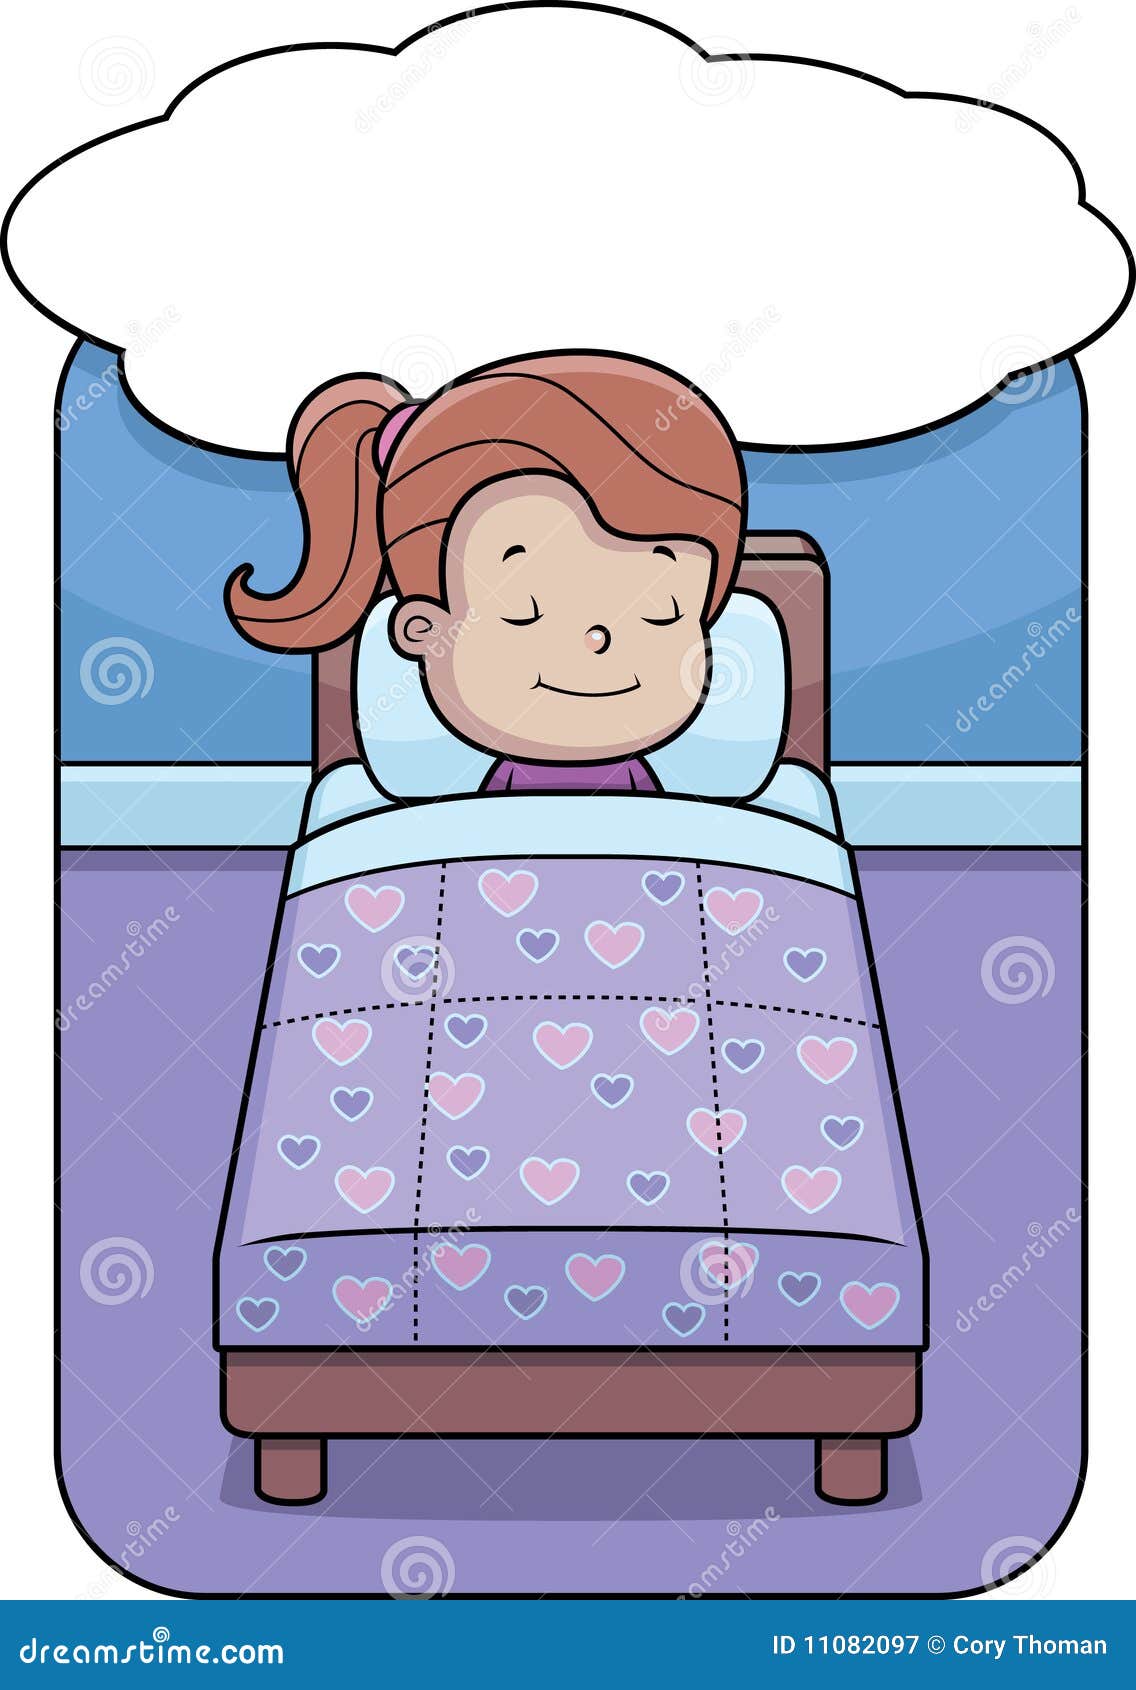 Girl Bedtime Royalty Free Stock Photography - Image: 11082097